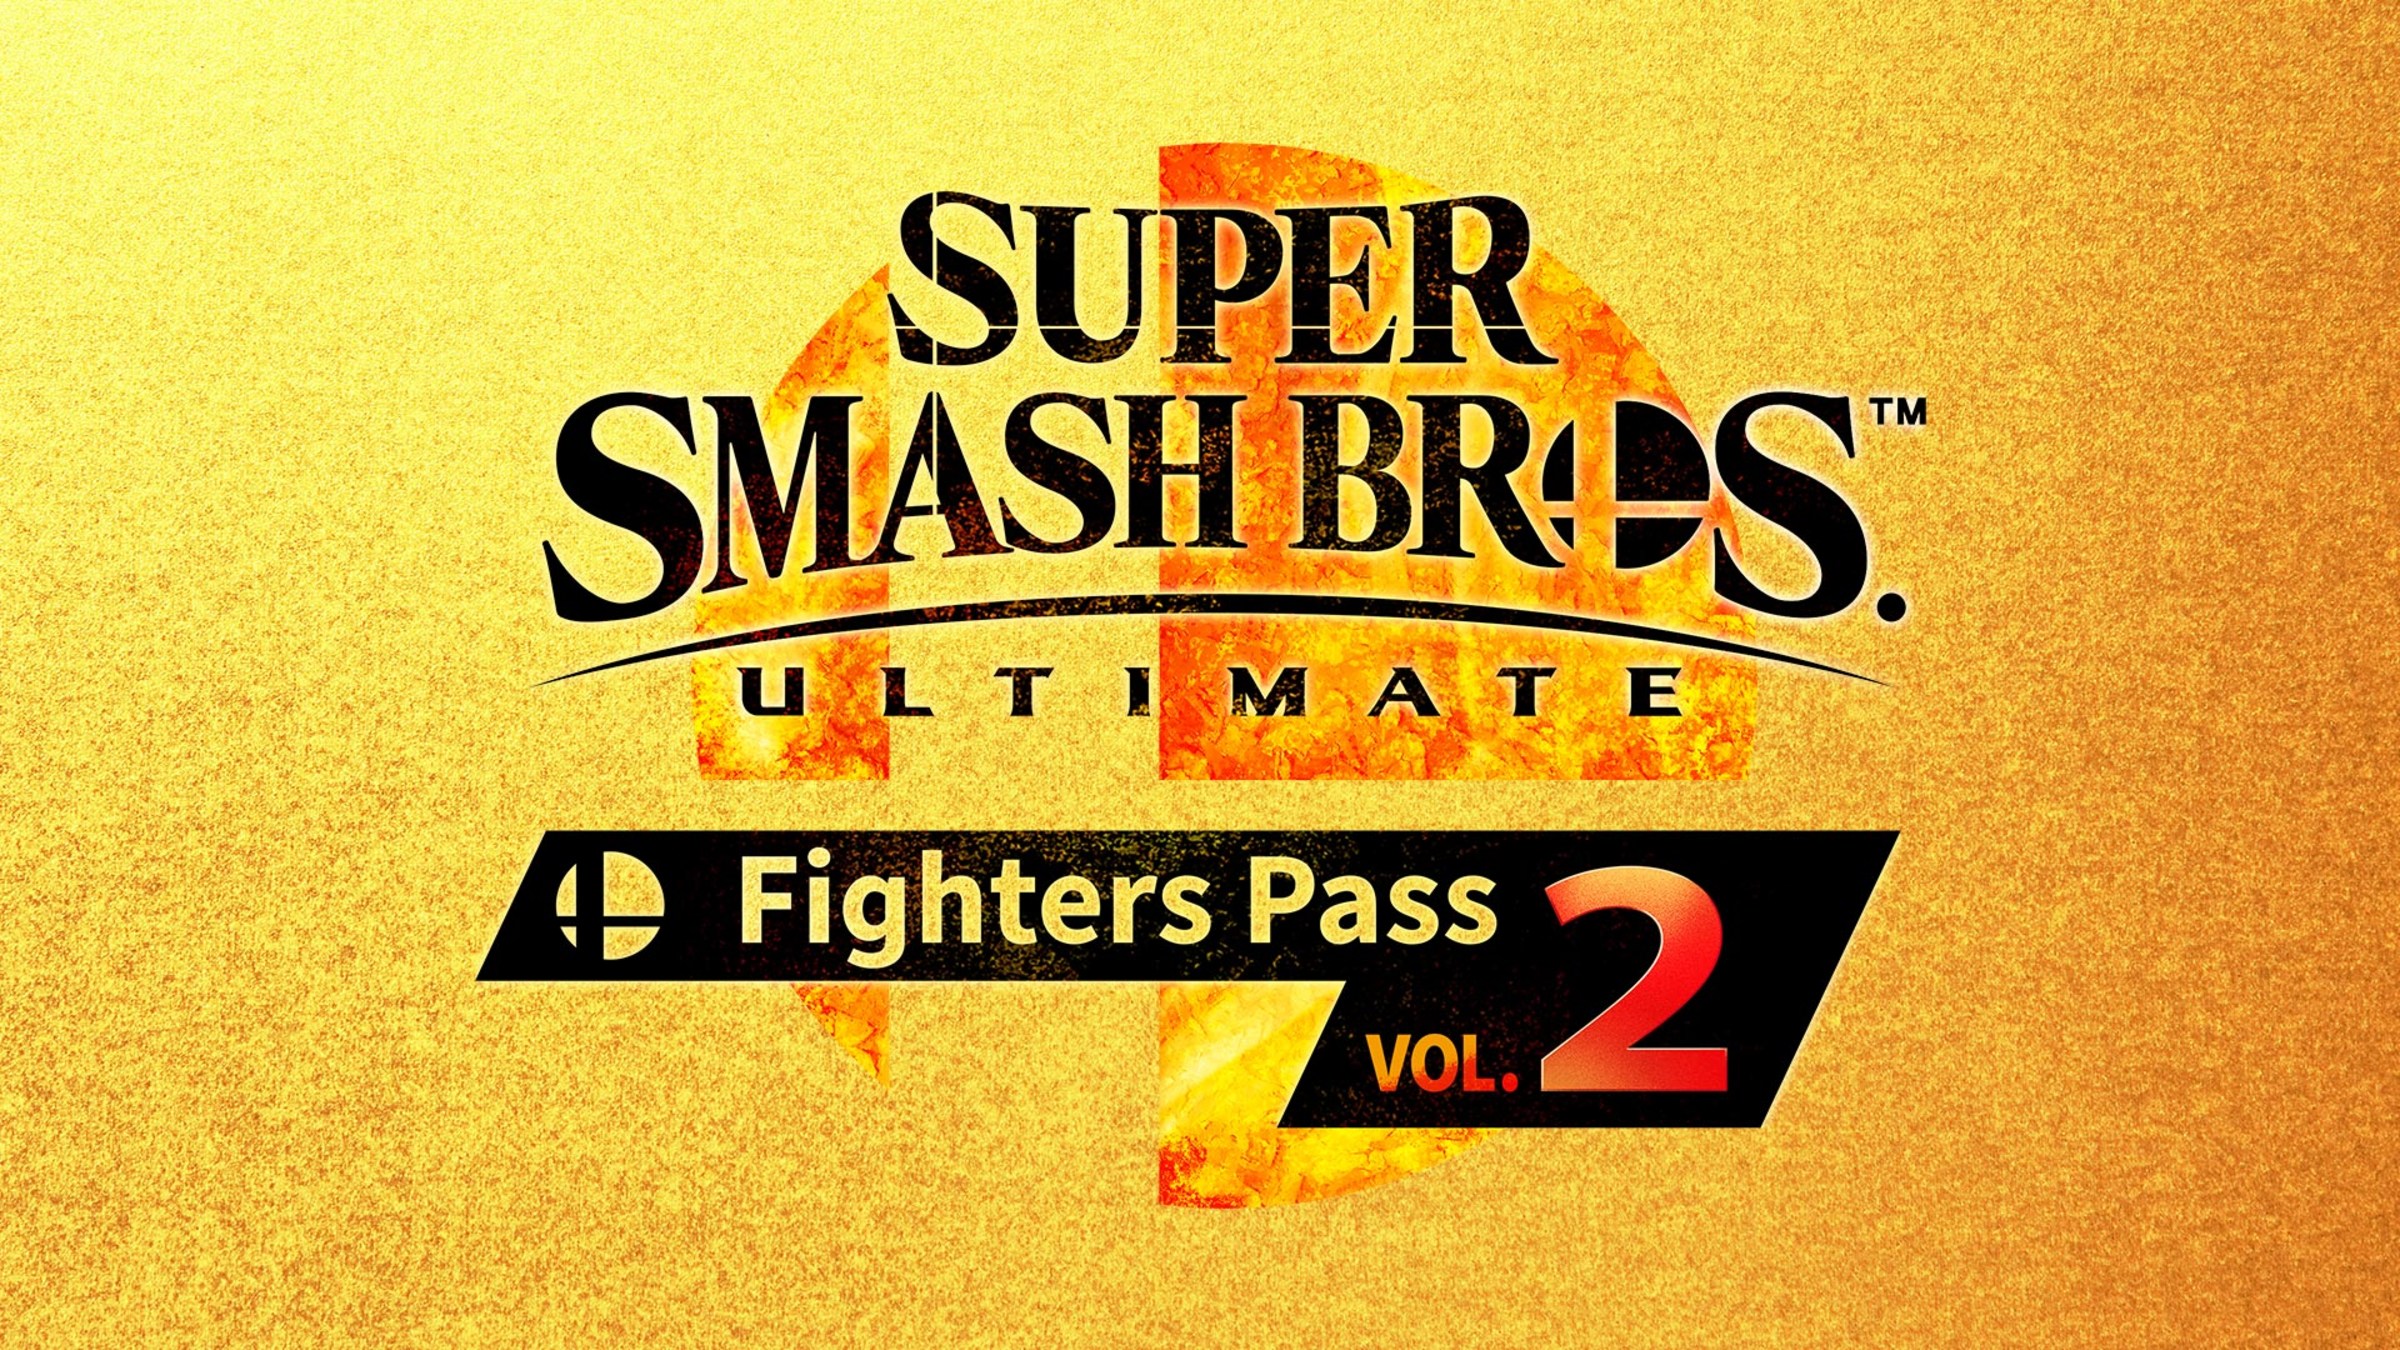 Bros.™ 2 Vol. Super Nintendo Nintendo Fighters Official for Smash Pass Site Ultimate: Switch -